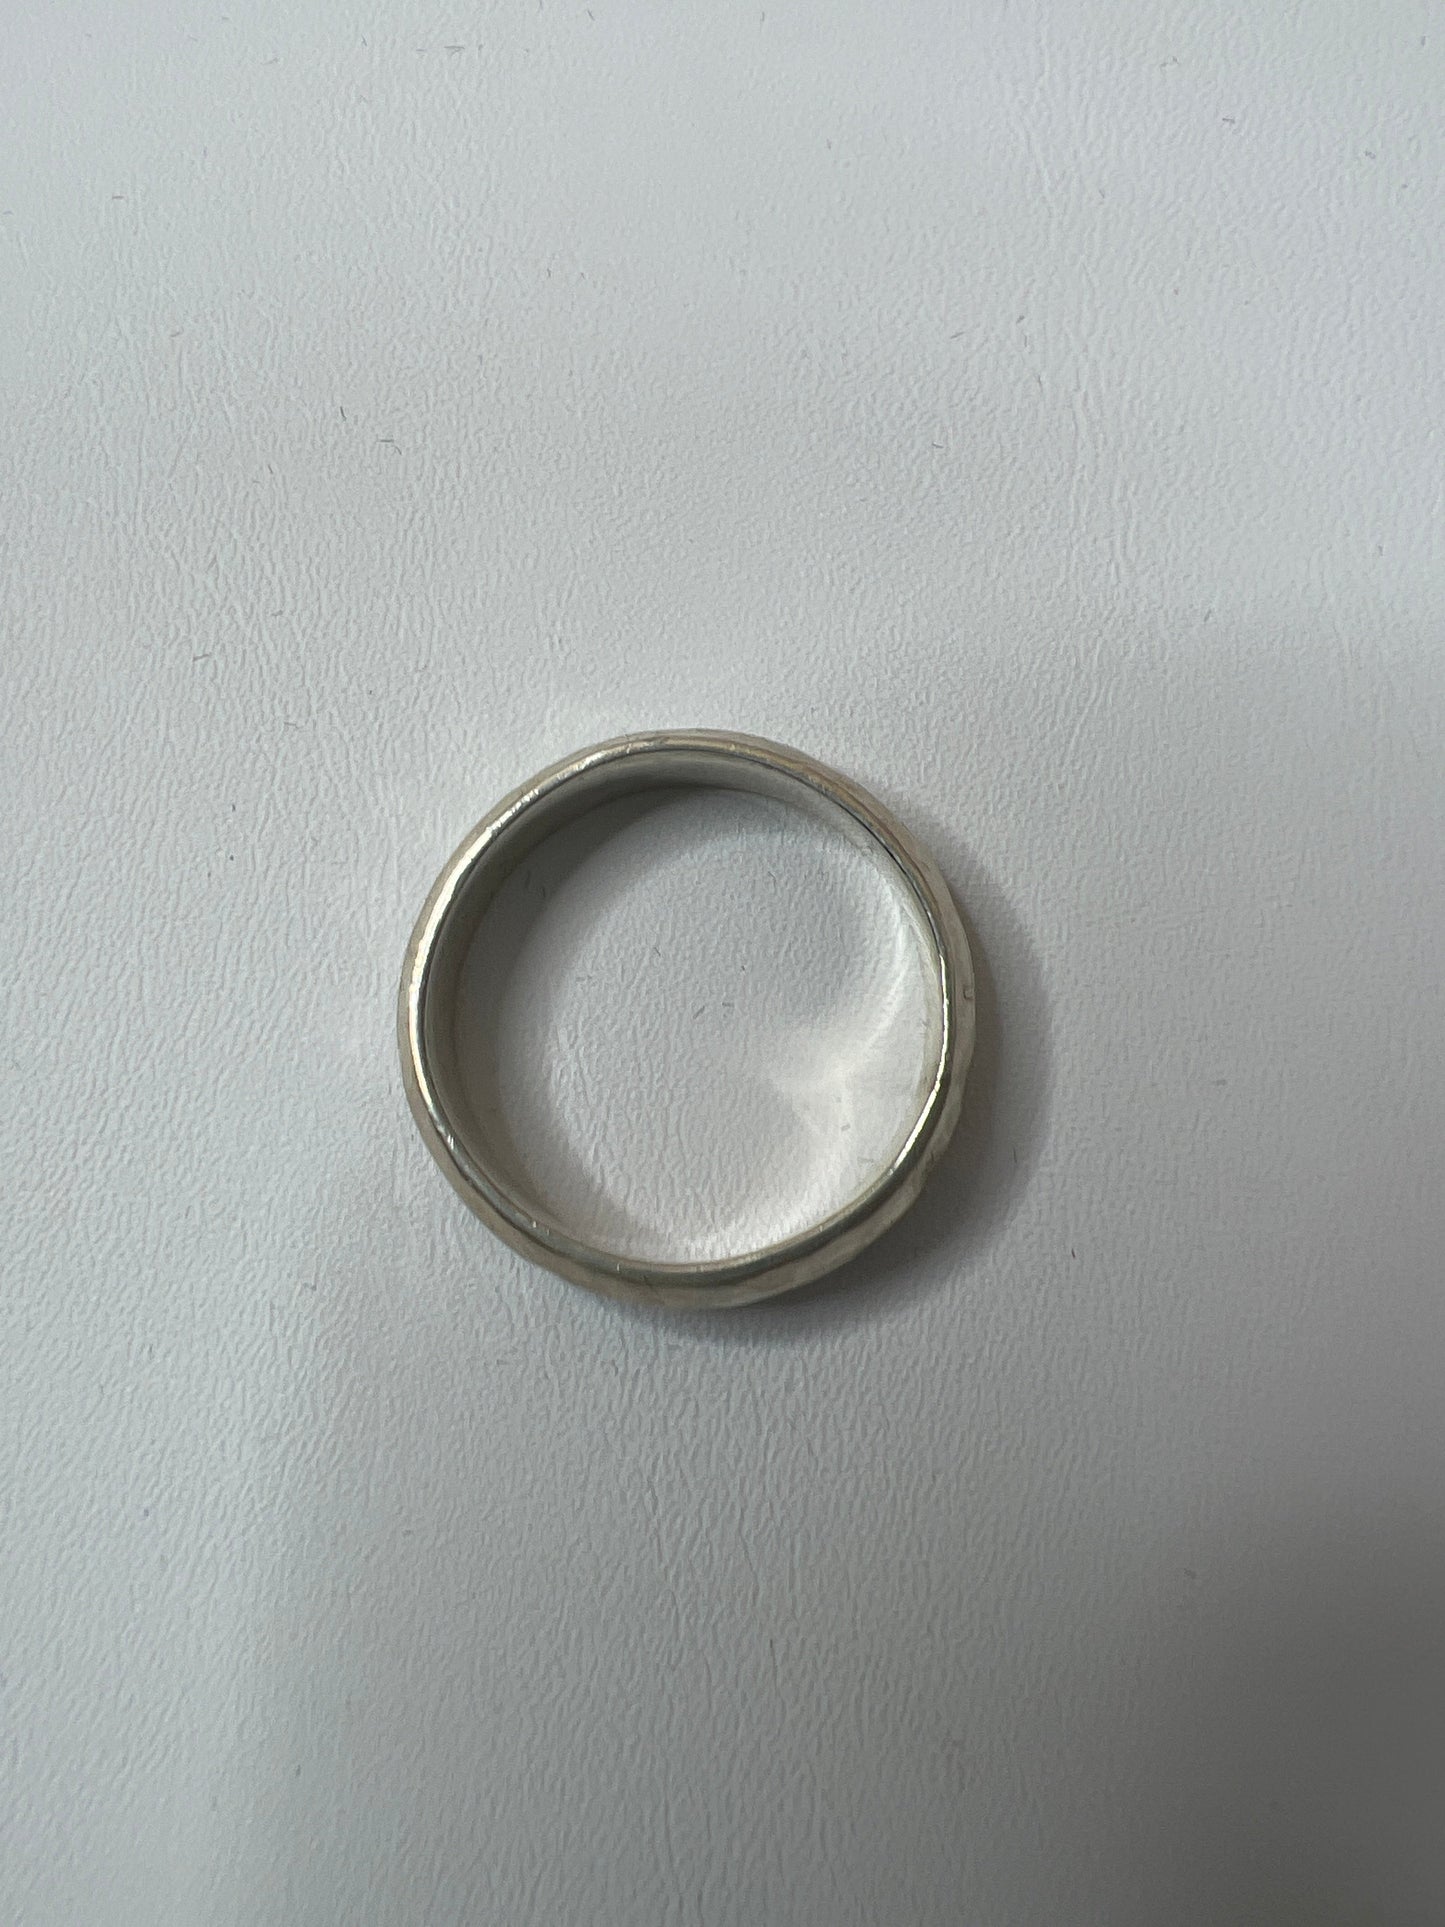 Ring Band Cmb, Size 11